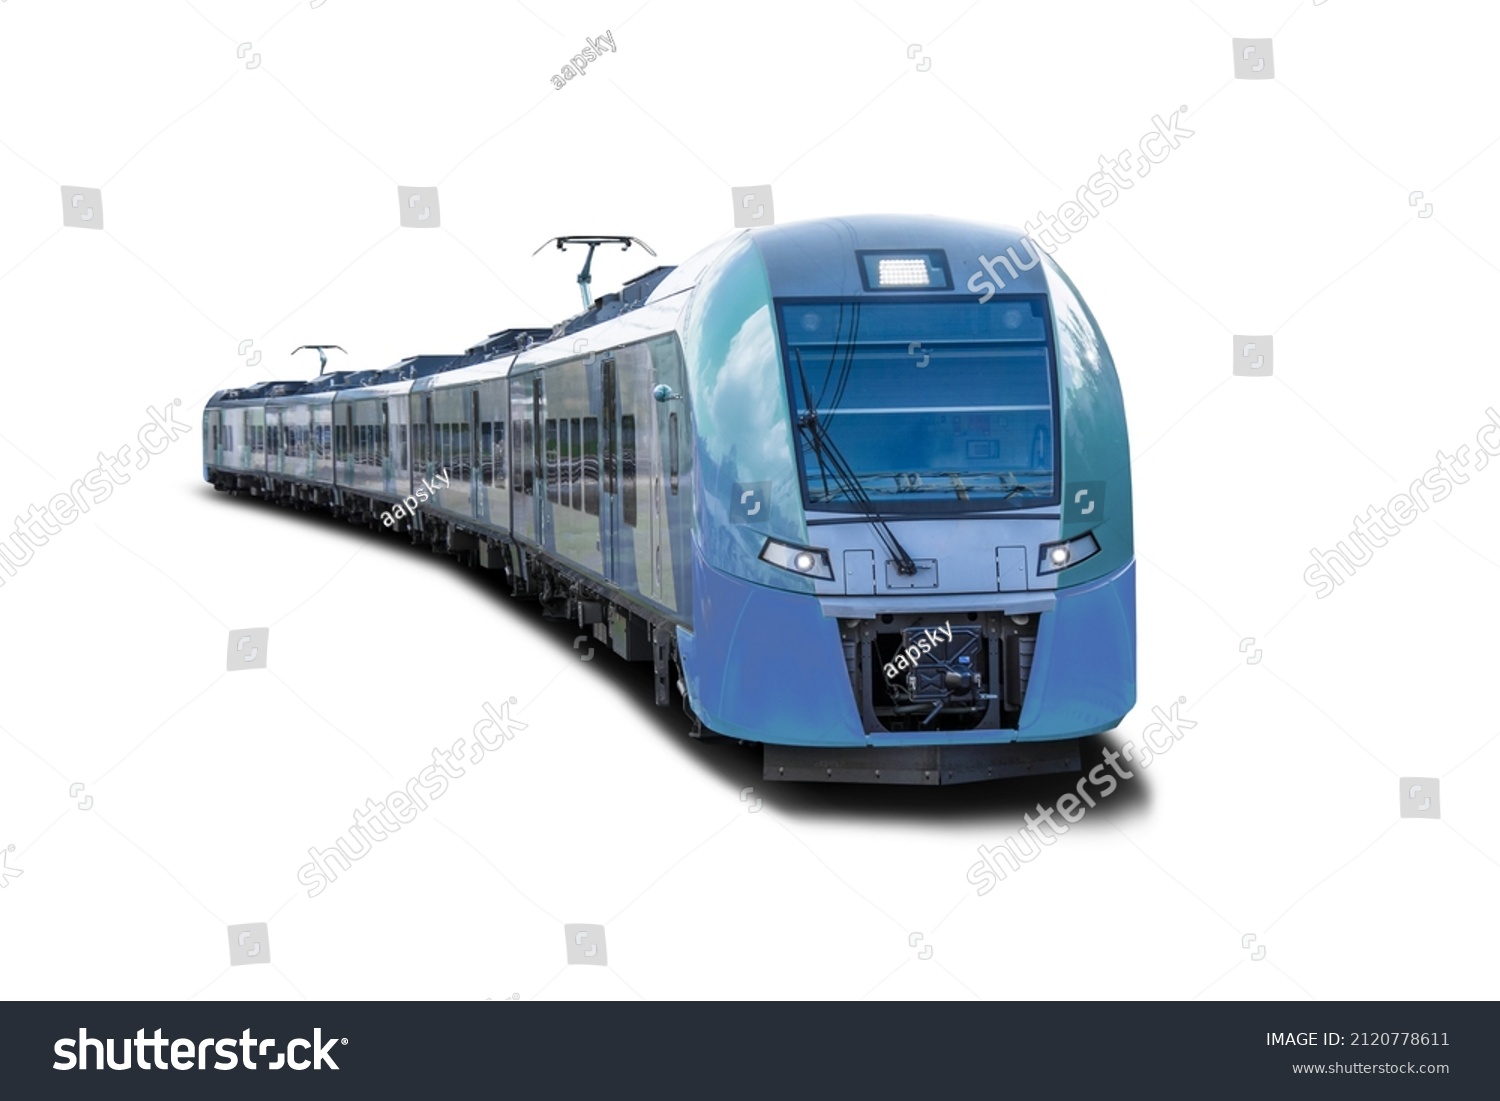 City electric train long train composition from wagons, isolated on white background. #2120778611